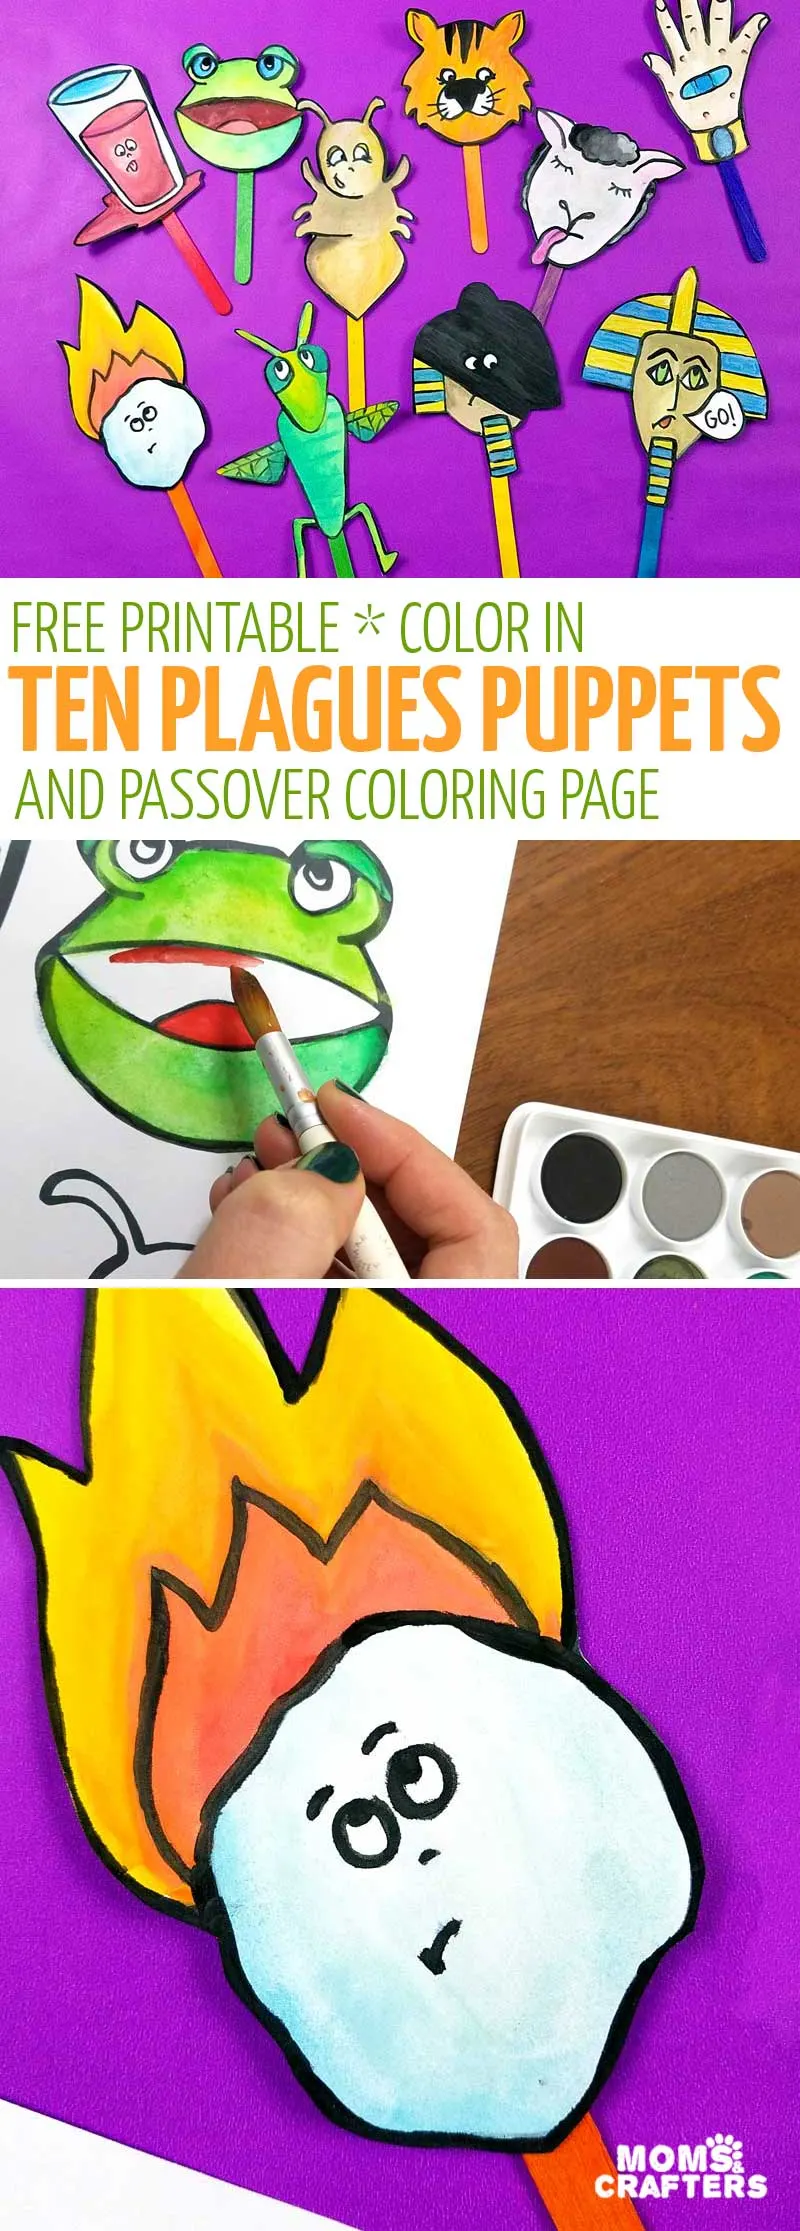 Print and craft these fun Passover puppets - featuring the ten plagues in a fun craft for kids. You'll also get a free printable ten plagues coloring page! #Passover #momsandcrafters #tenplagues